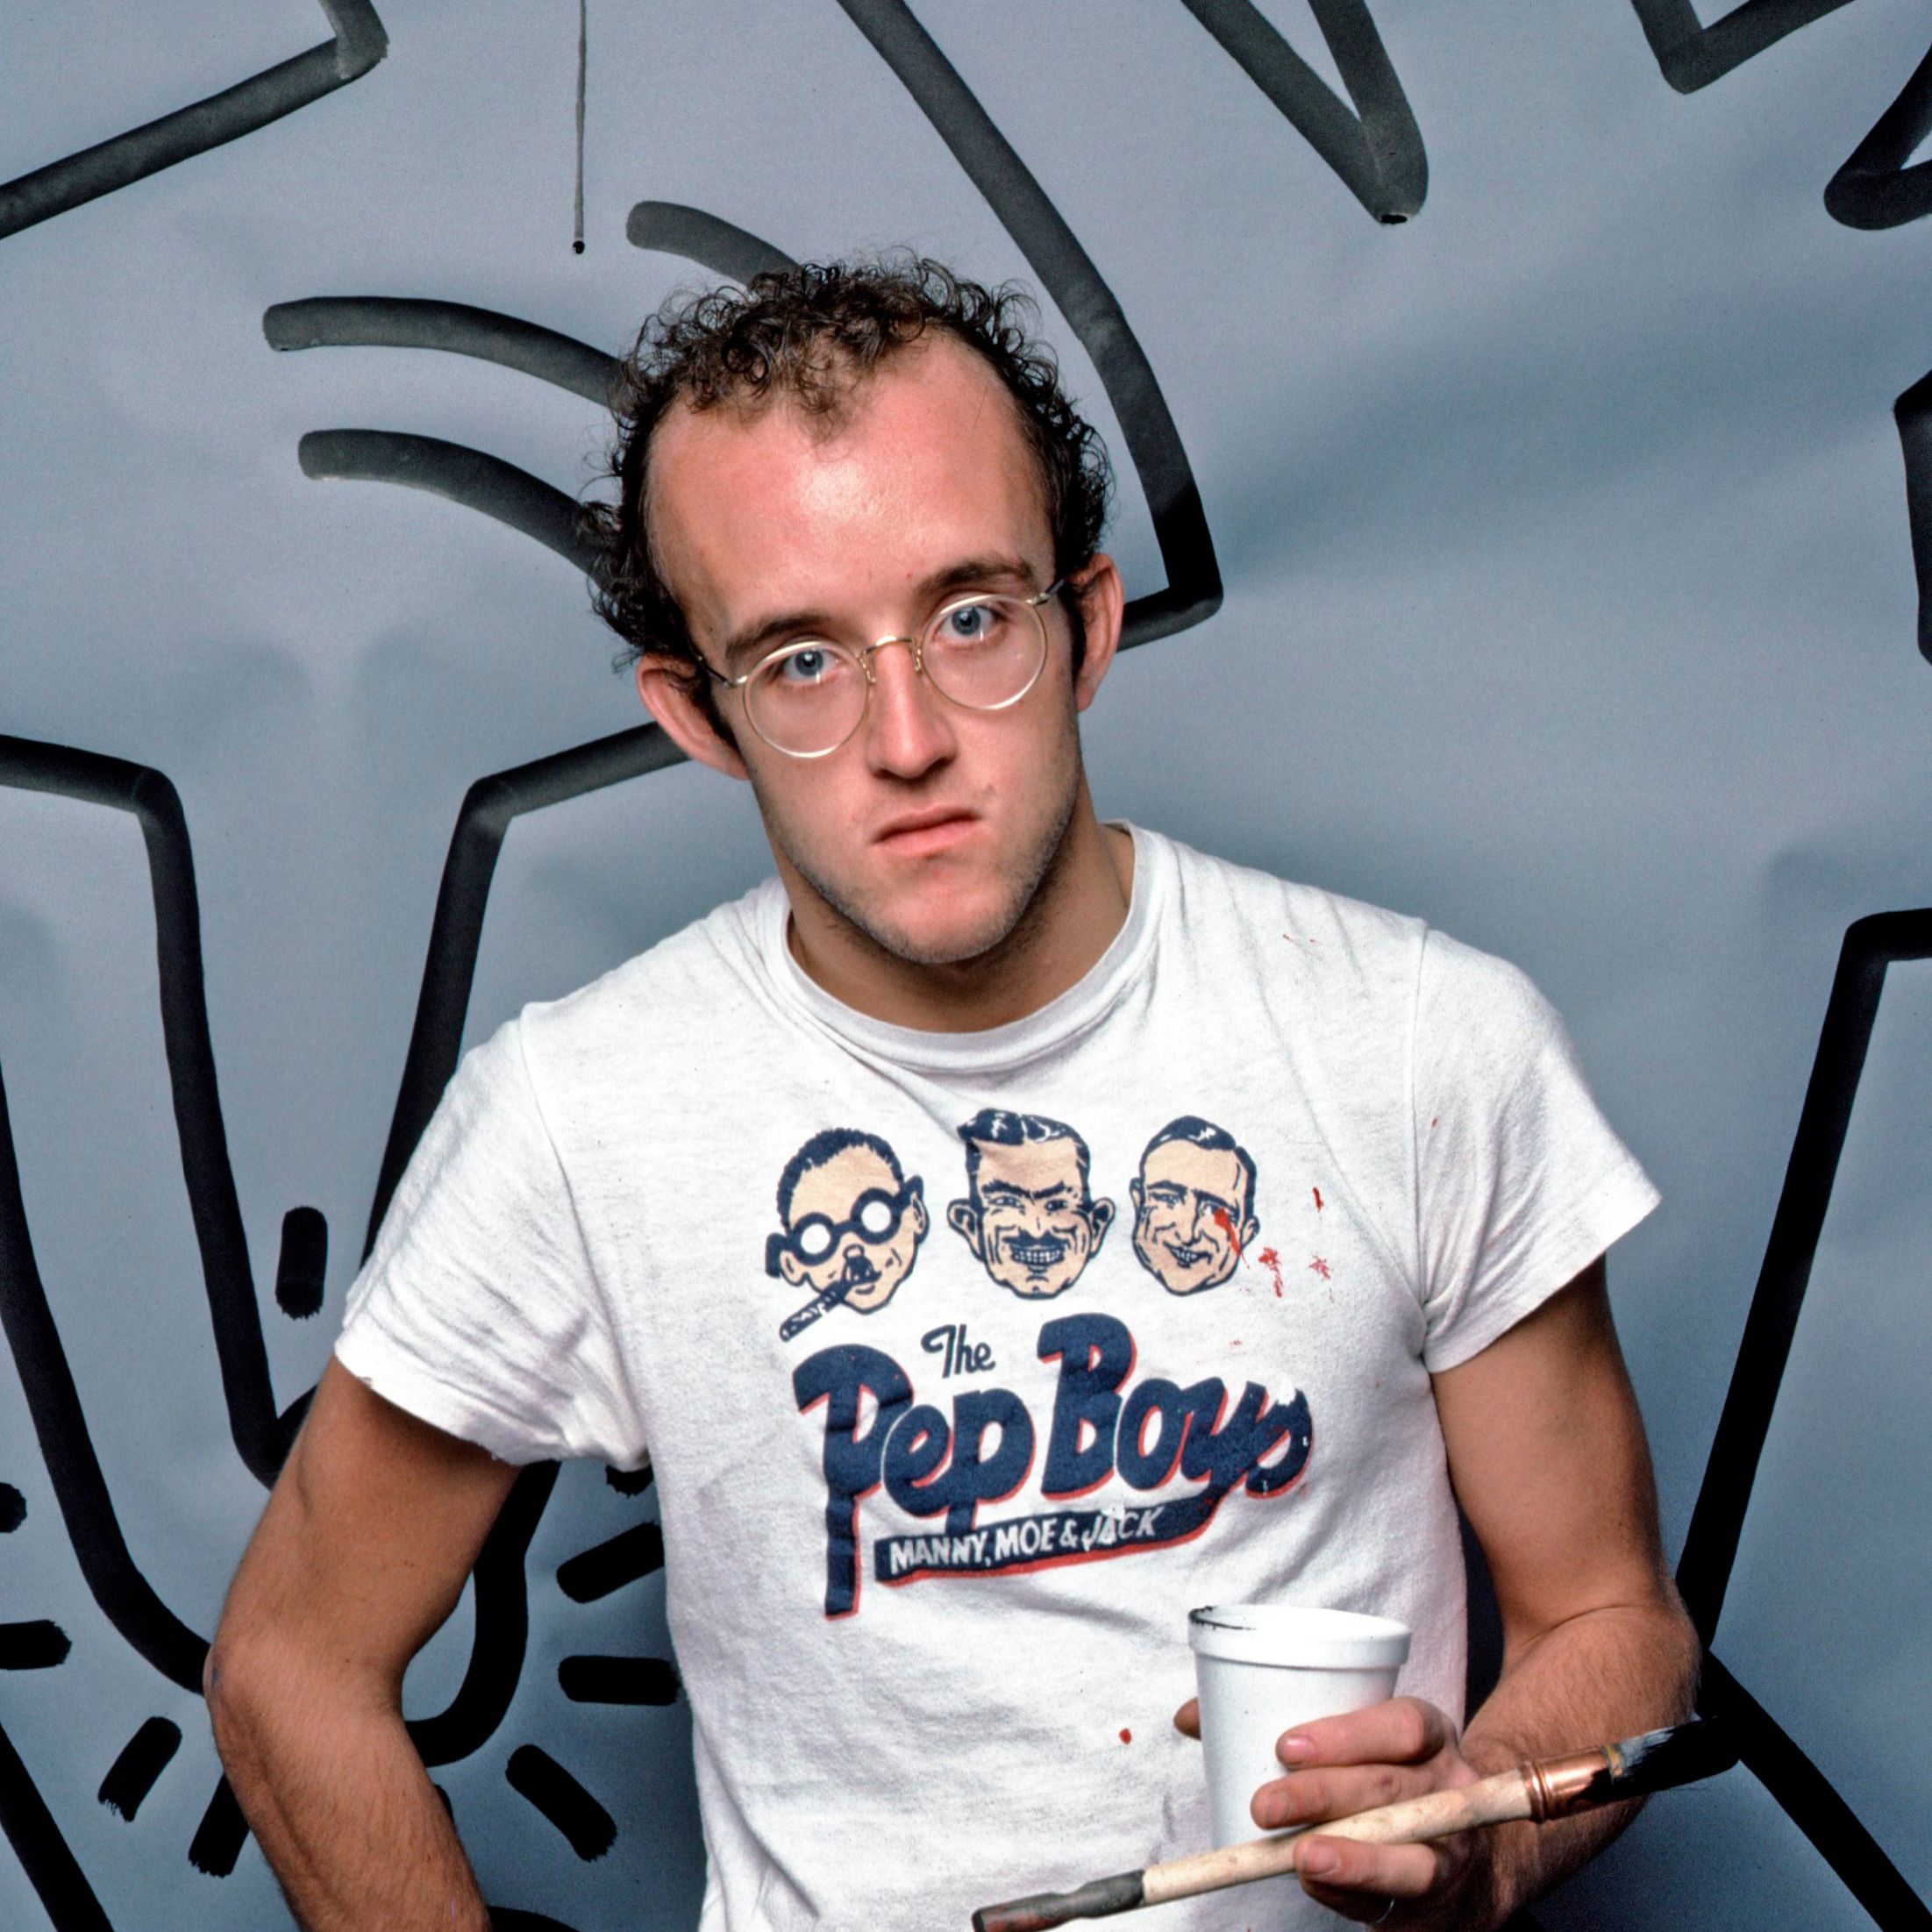 Keith Haring - Art, Death & Facts